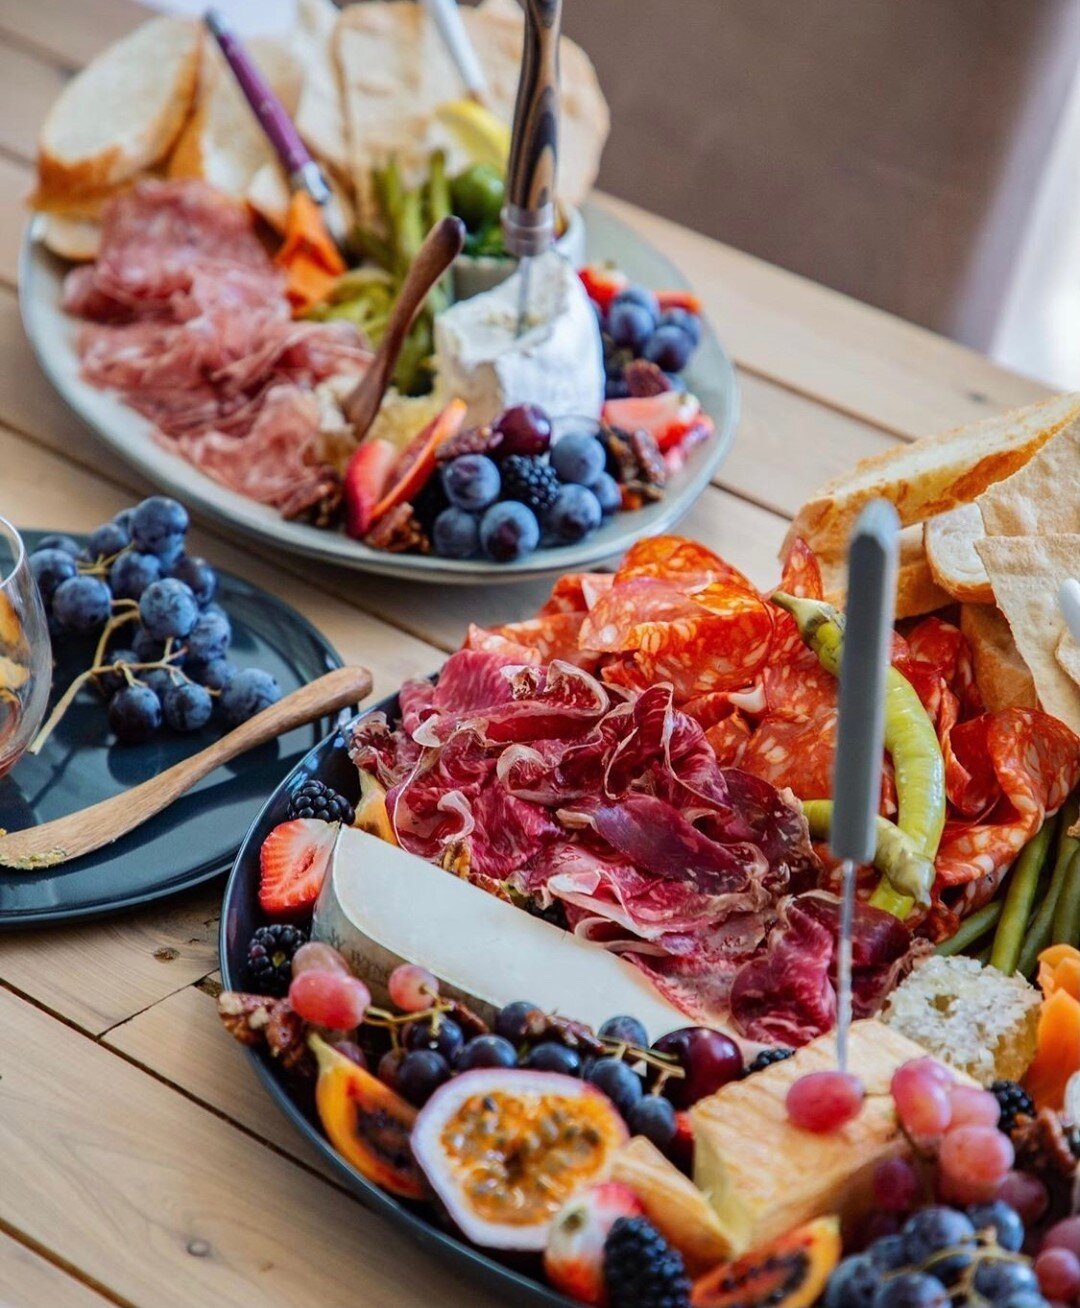 Have you had a chance to check out the awesome platters at @ushertinklerwines ?⁠
⁠
You are seriously missing out! Let us take you here to indulge in all of this goodness!🧀🫐🍐